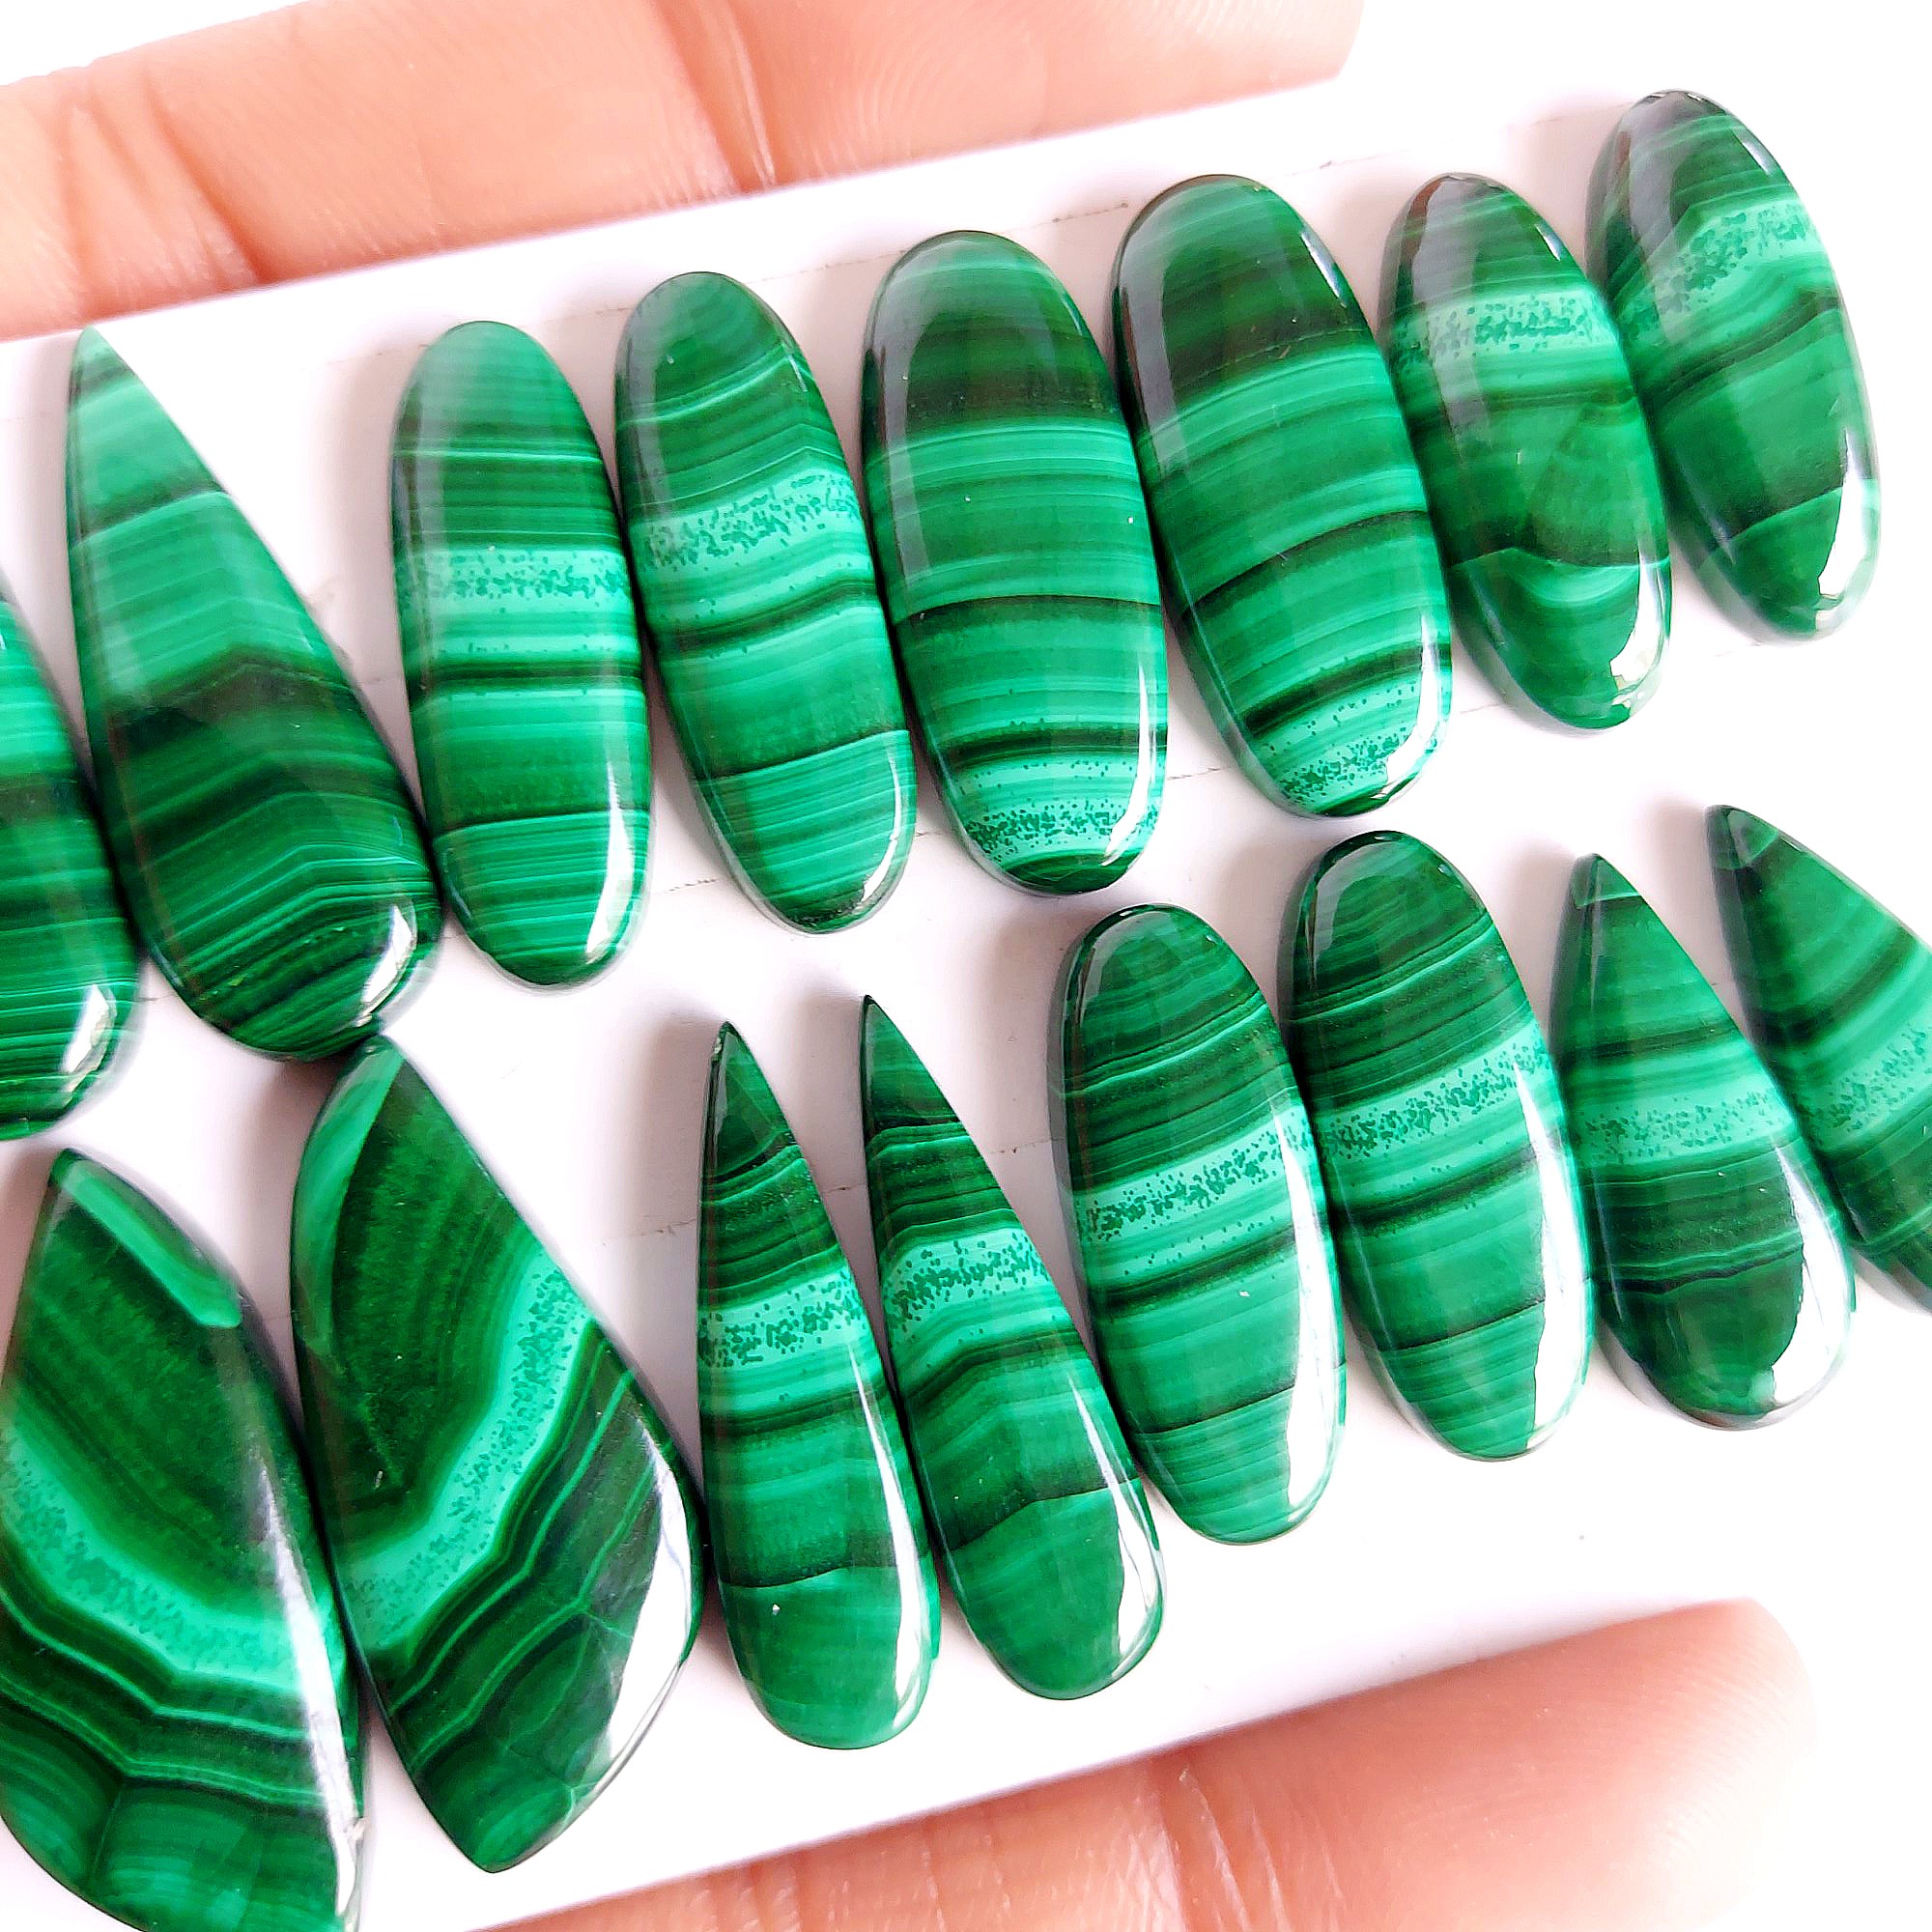 211.Cts 8 pair Natural Smooth Malachite Matched Earring Pair Mix Loose Briolette Gemstone Cabochon Pair Lot Size 28x12 21x8mm